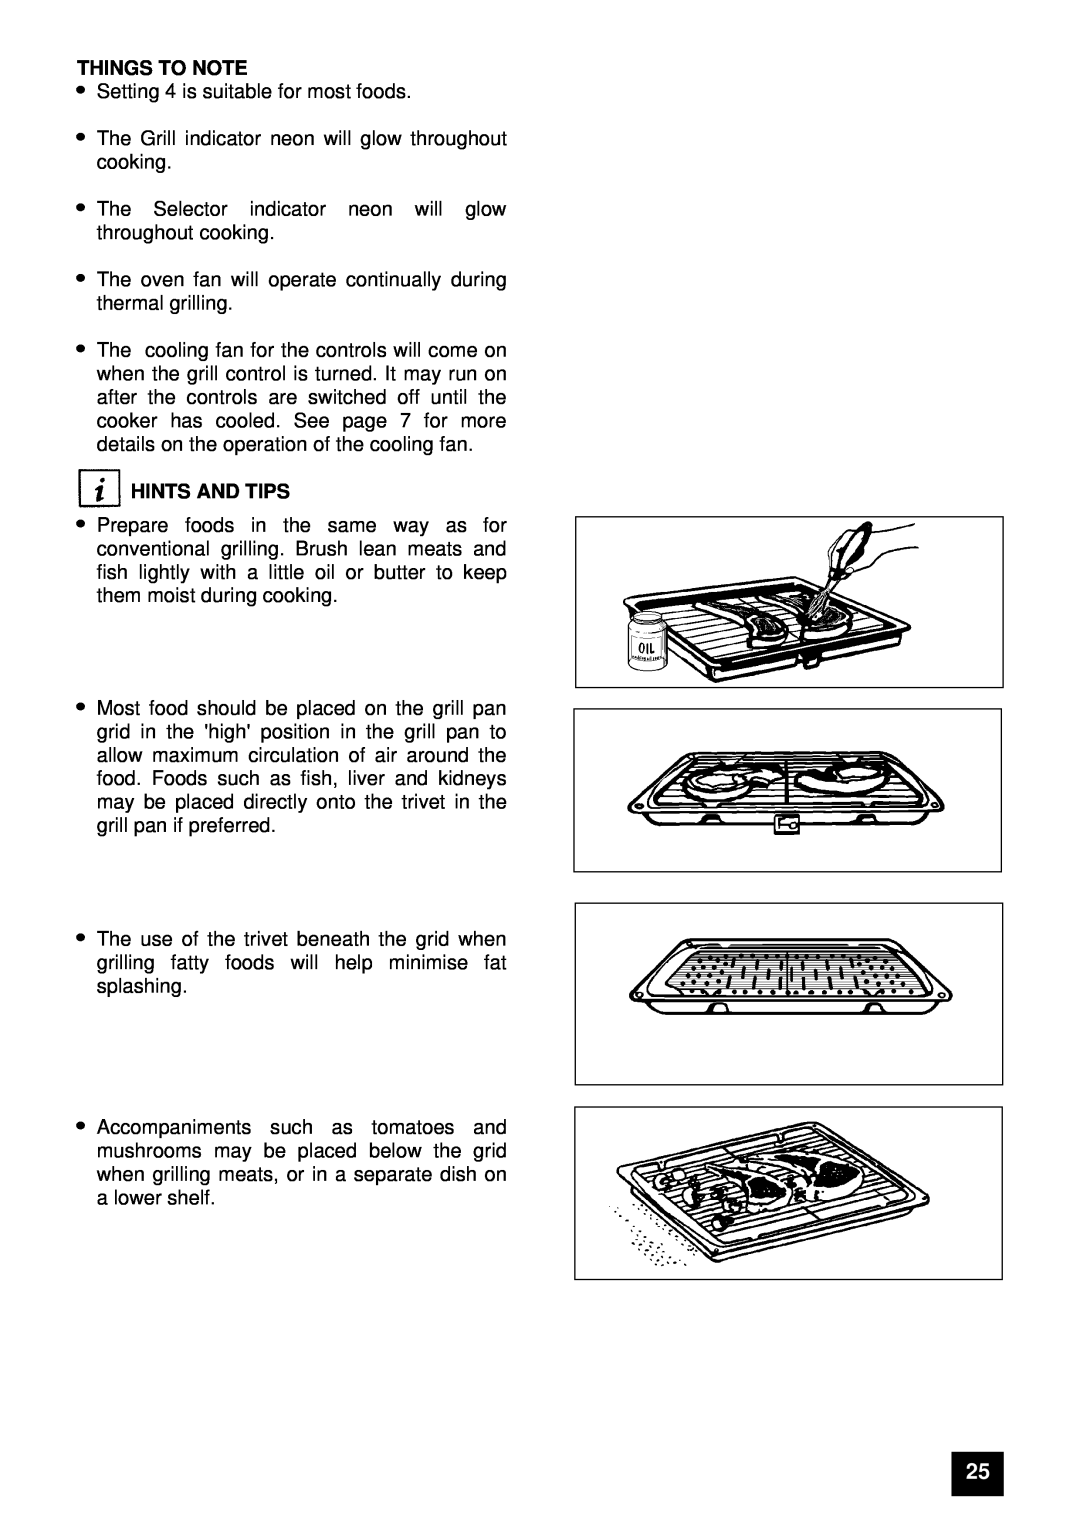 Tricity Bendix E 750 installation instructions Things To Note, Setting 4 is suitable for most foods, Hints And Tips 